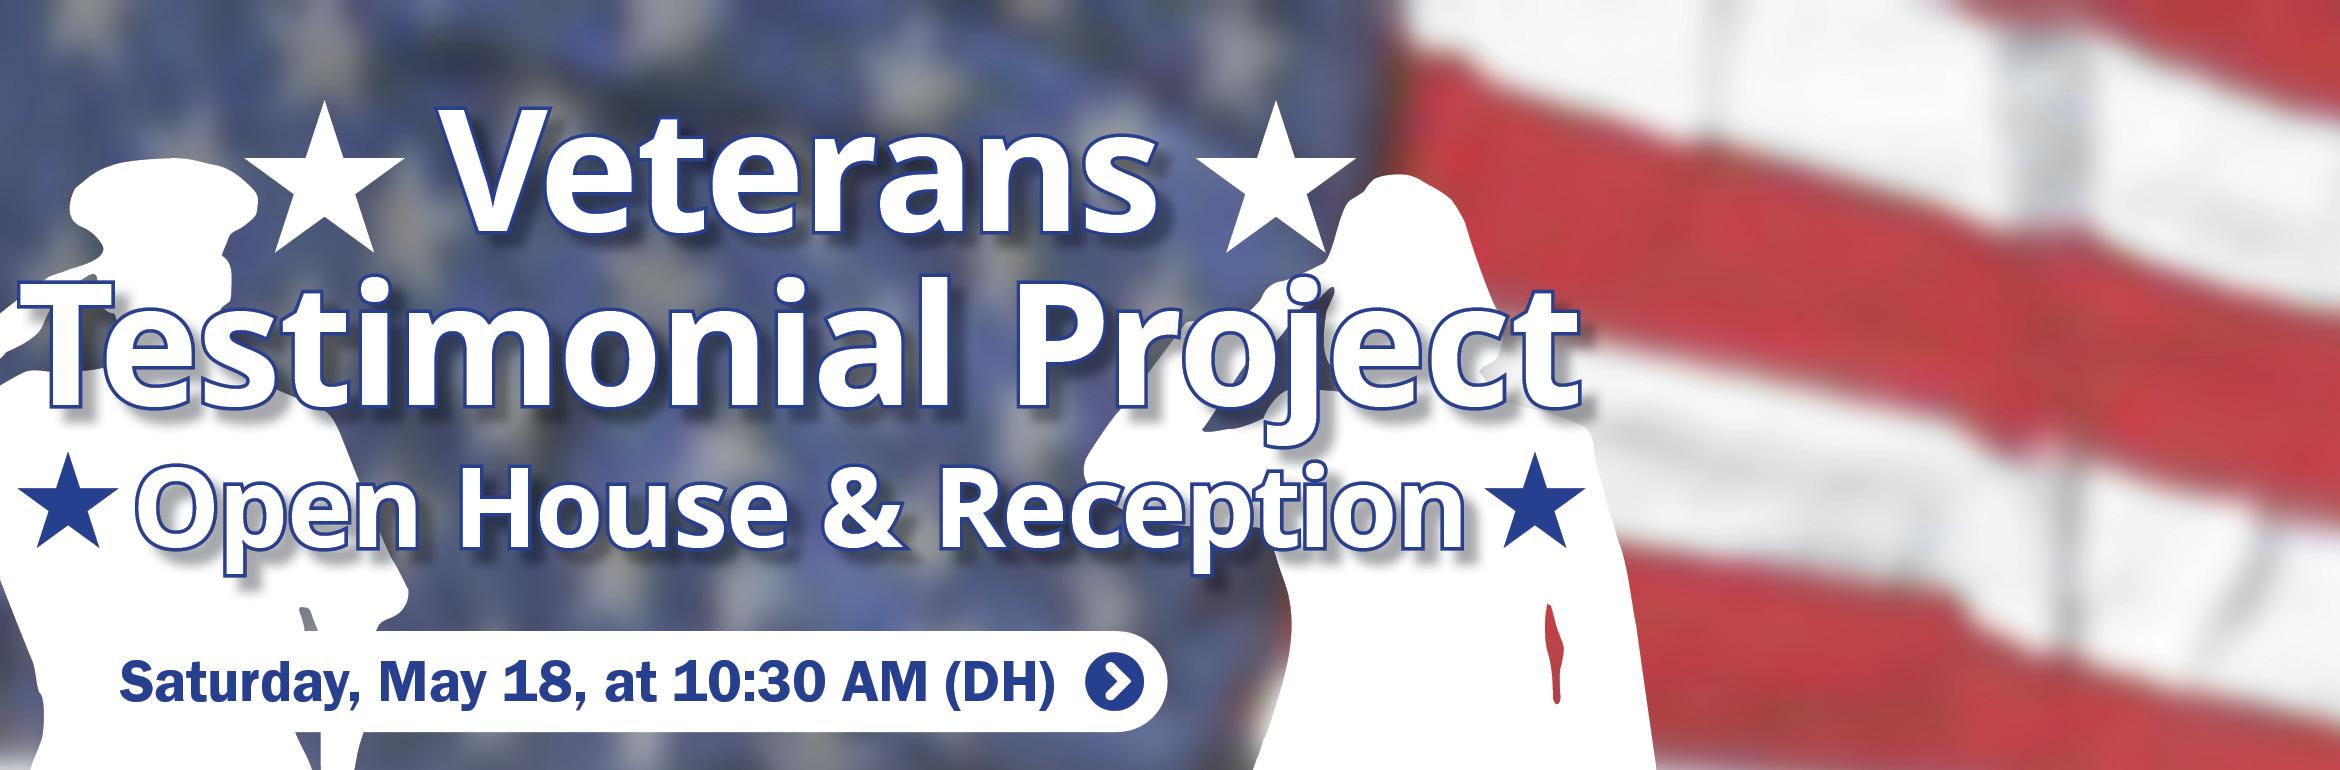 Veterans Testimonial Project Open House & Reception. Saturday, May 18, at 10:30 AM (DH).